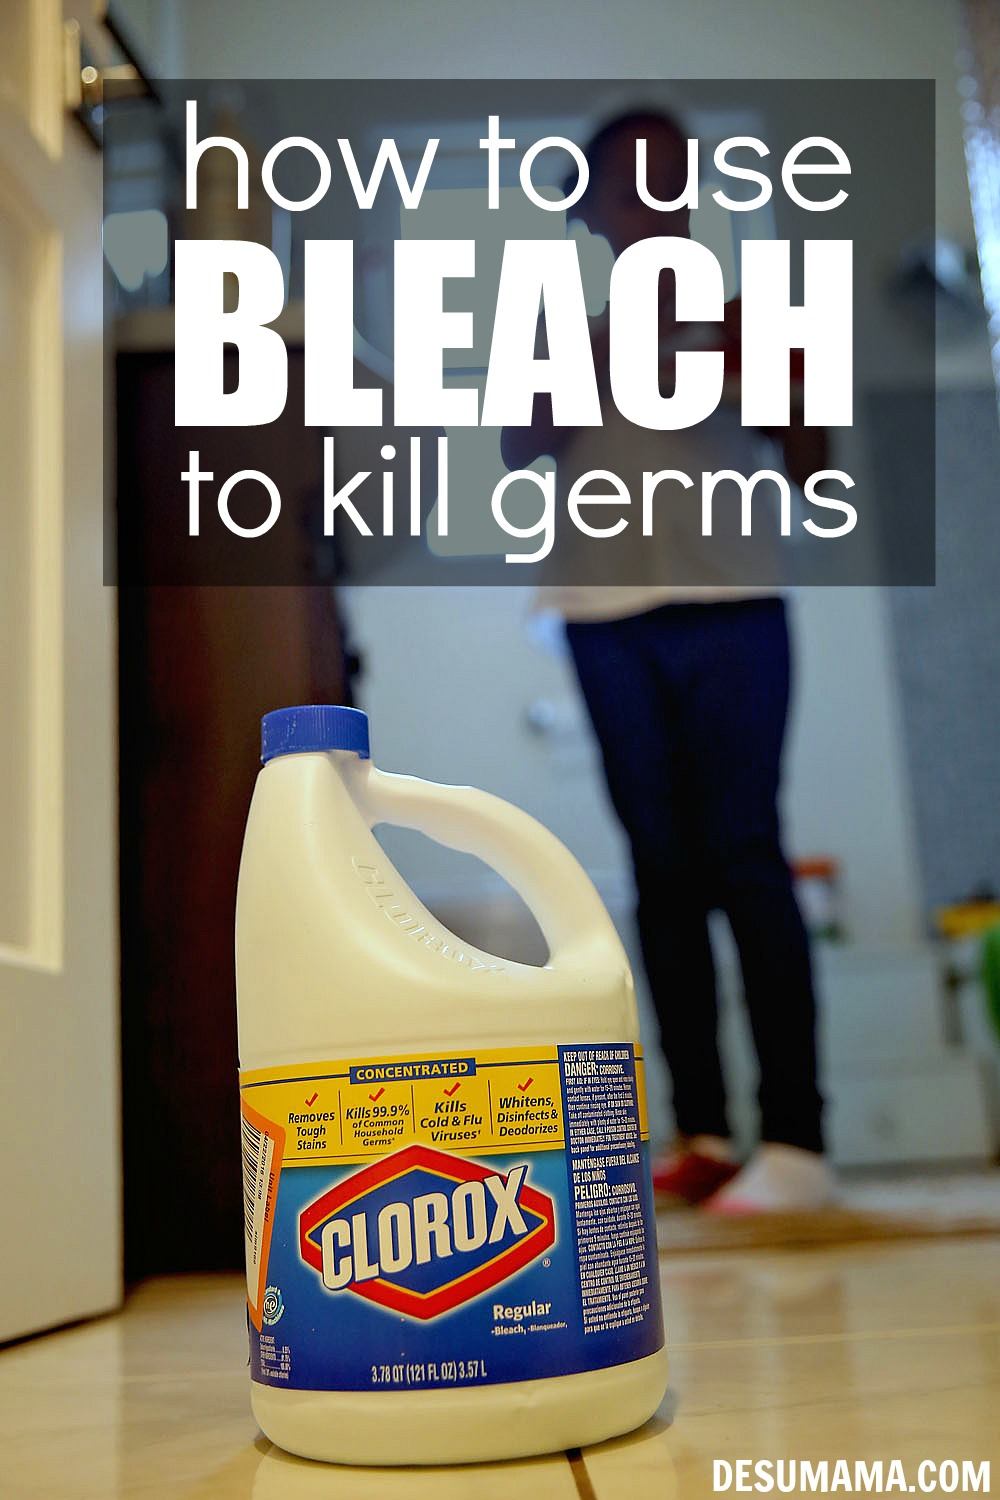 how to kill germs using bleach, how to kill germs in laundry